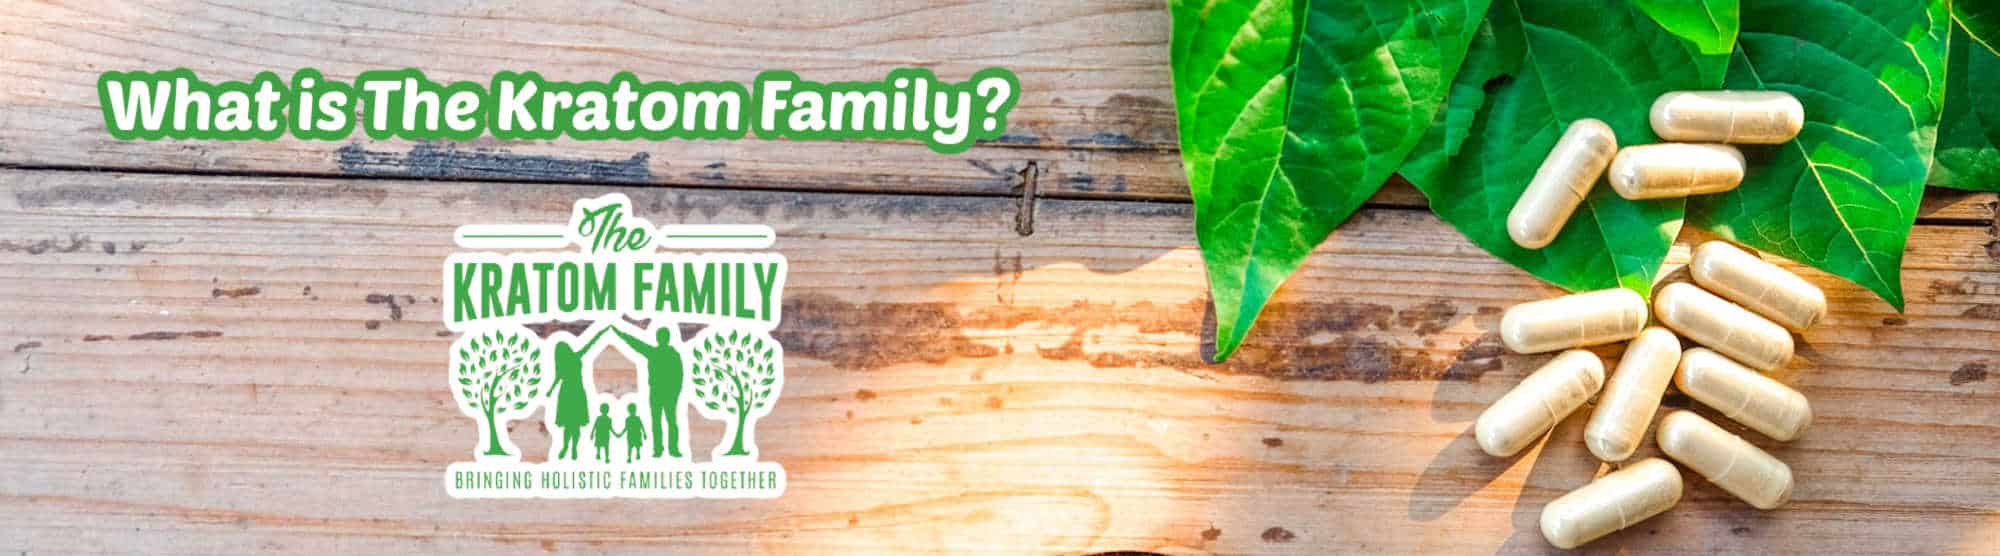 image of what is the kratom family